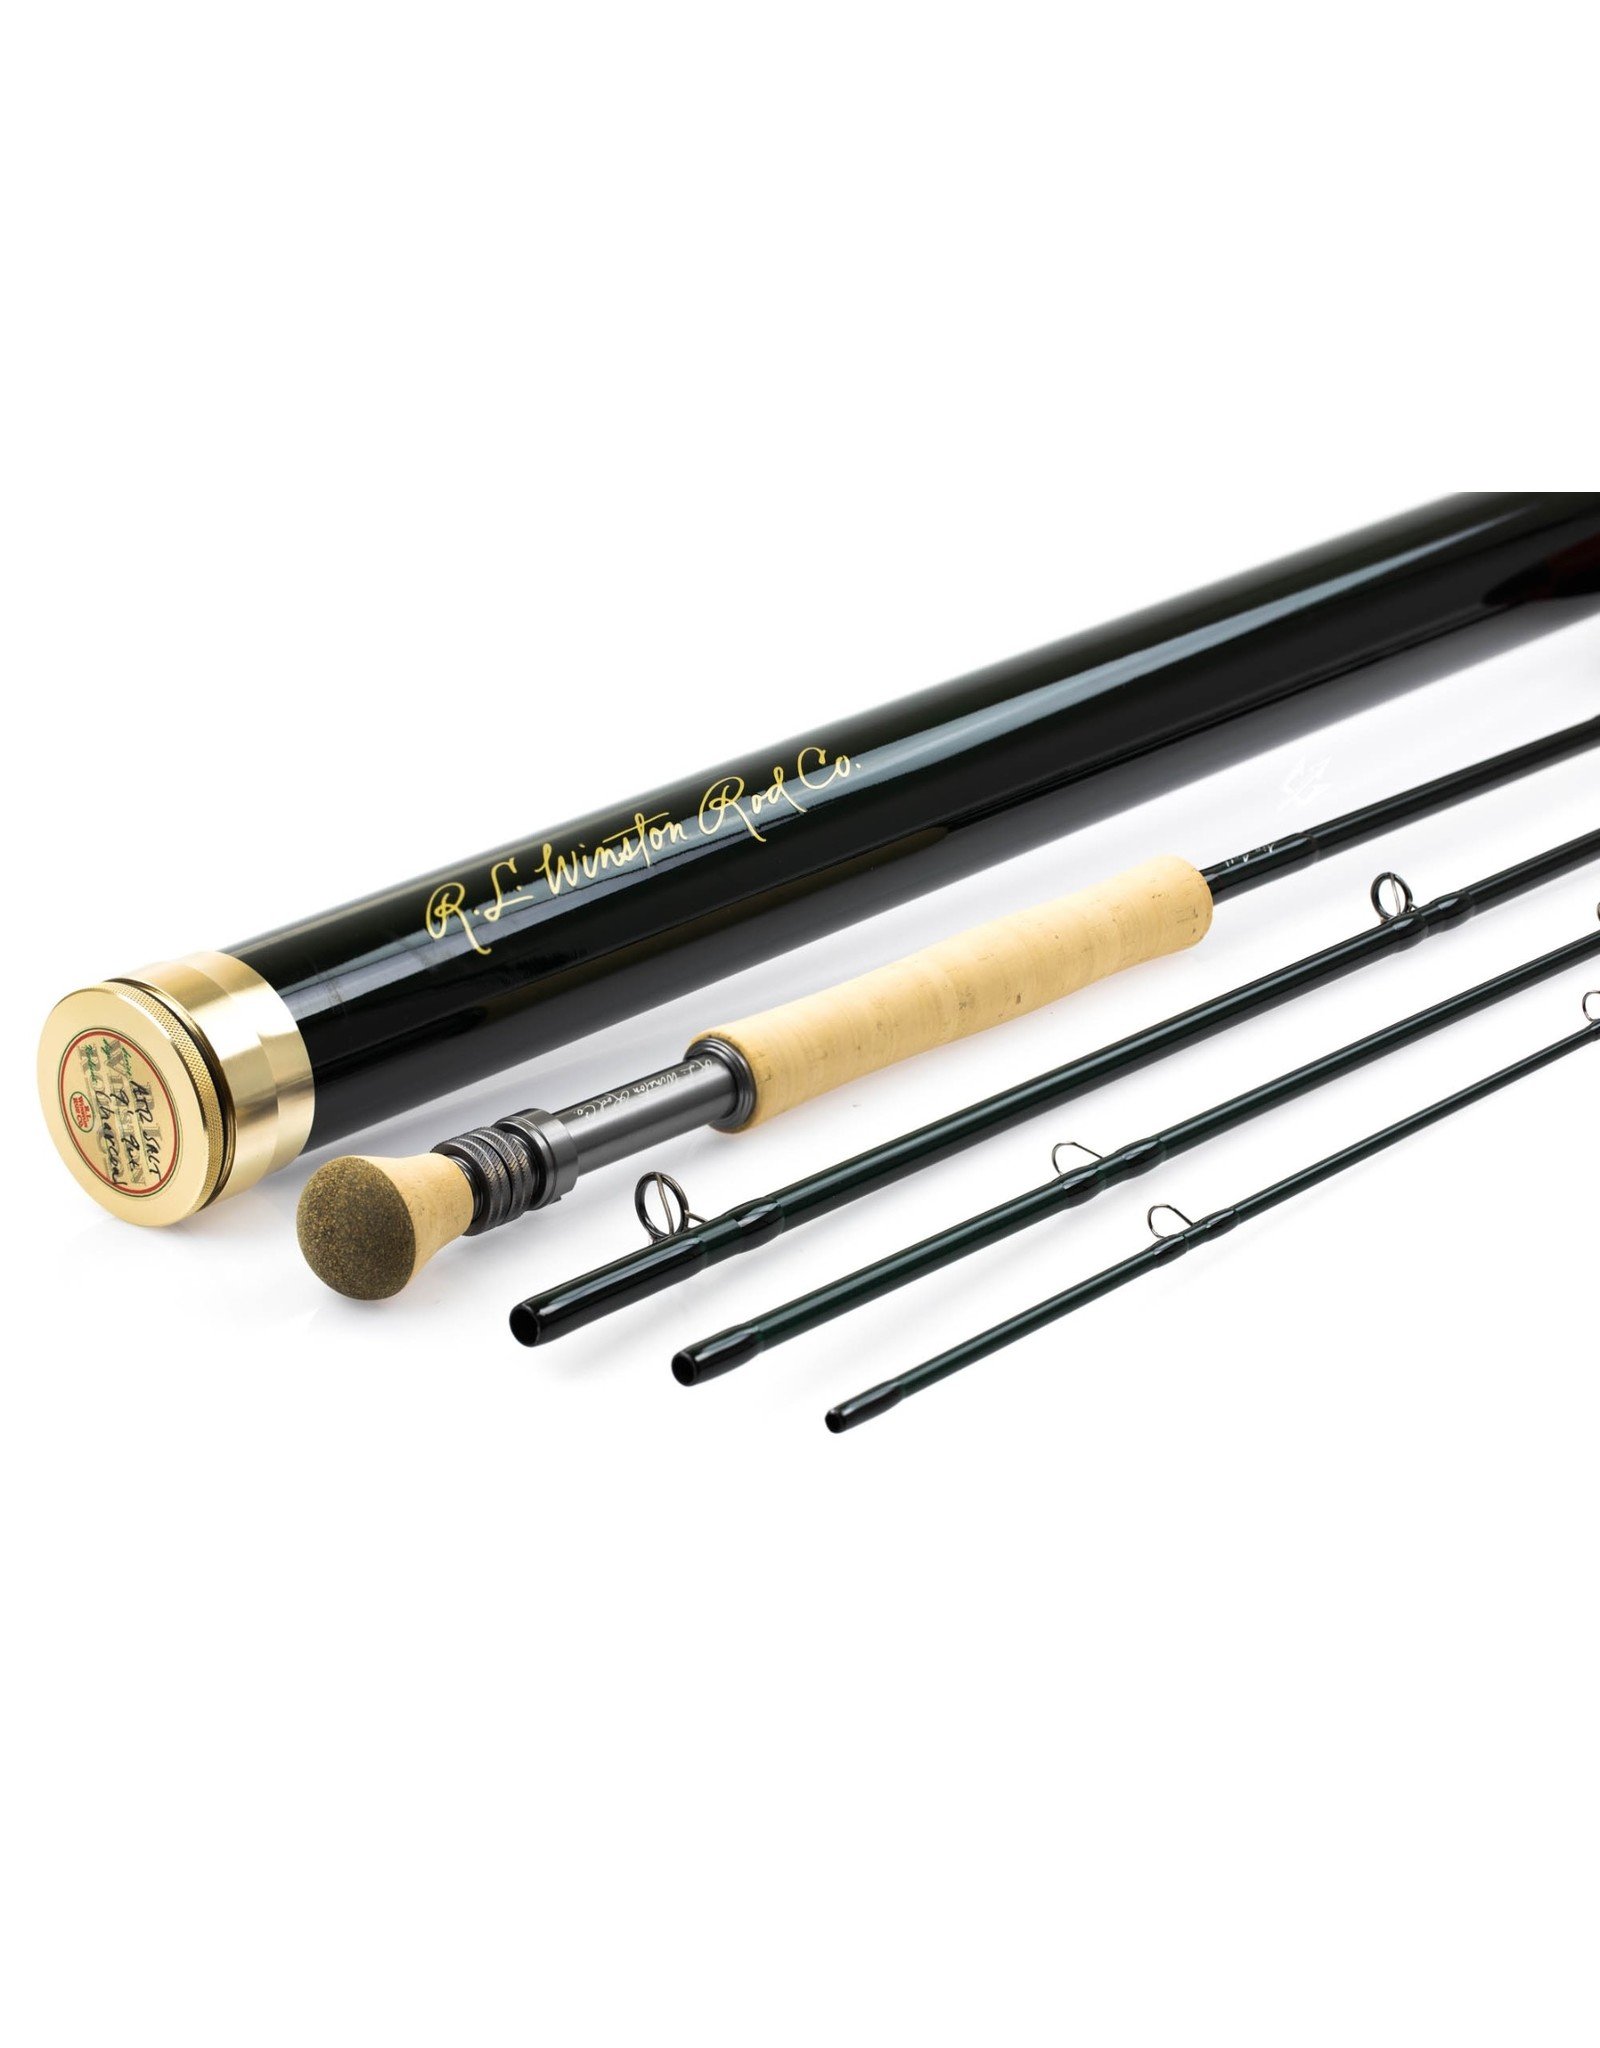 R.L. Winston - Saltwater Air Rod - Mountain Angler